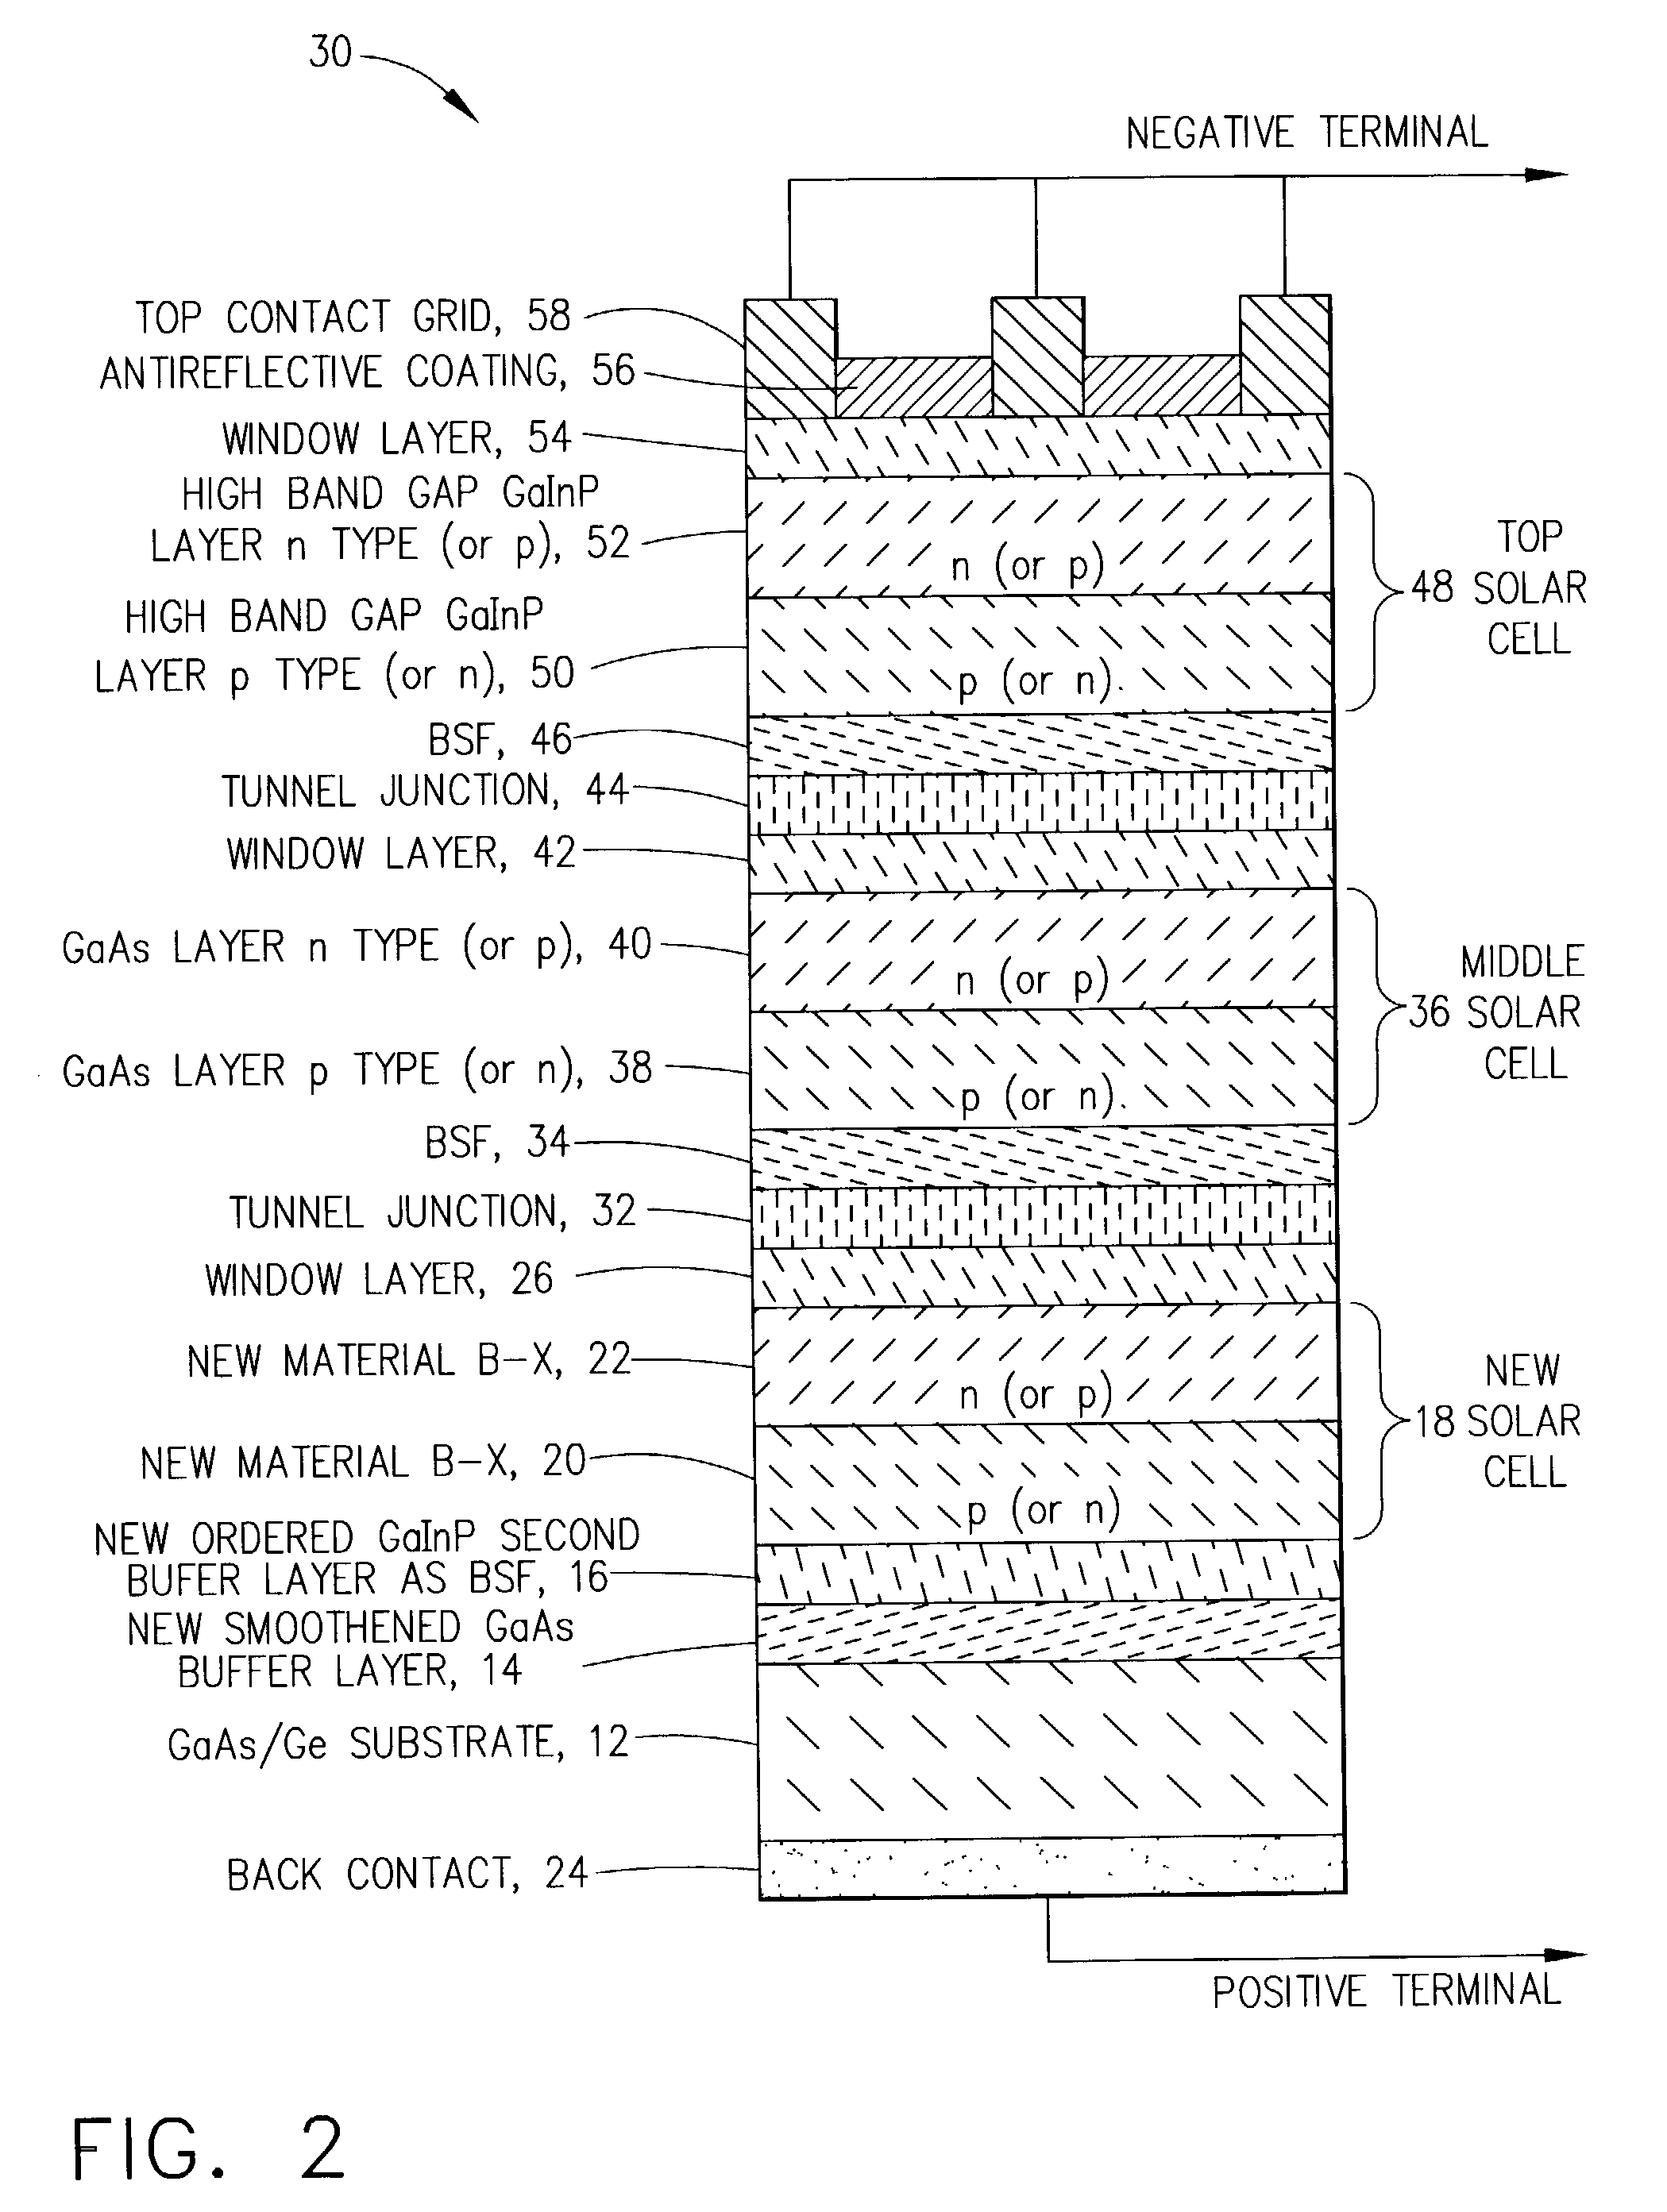 Multi-junction photovoltaic cell having buffer layers for the growth of single crystal boron compounds